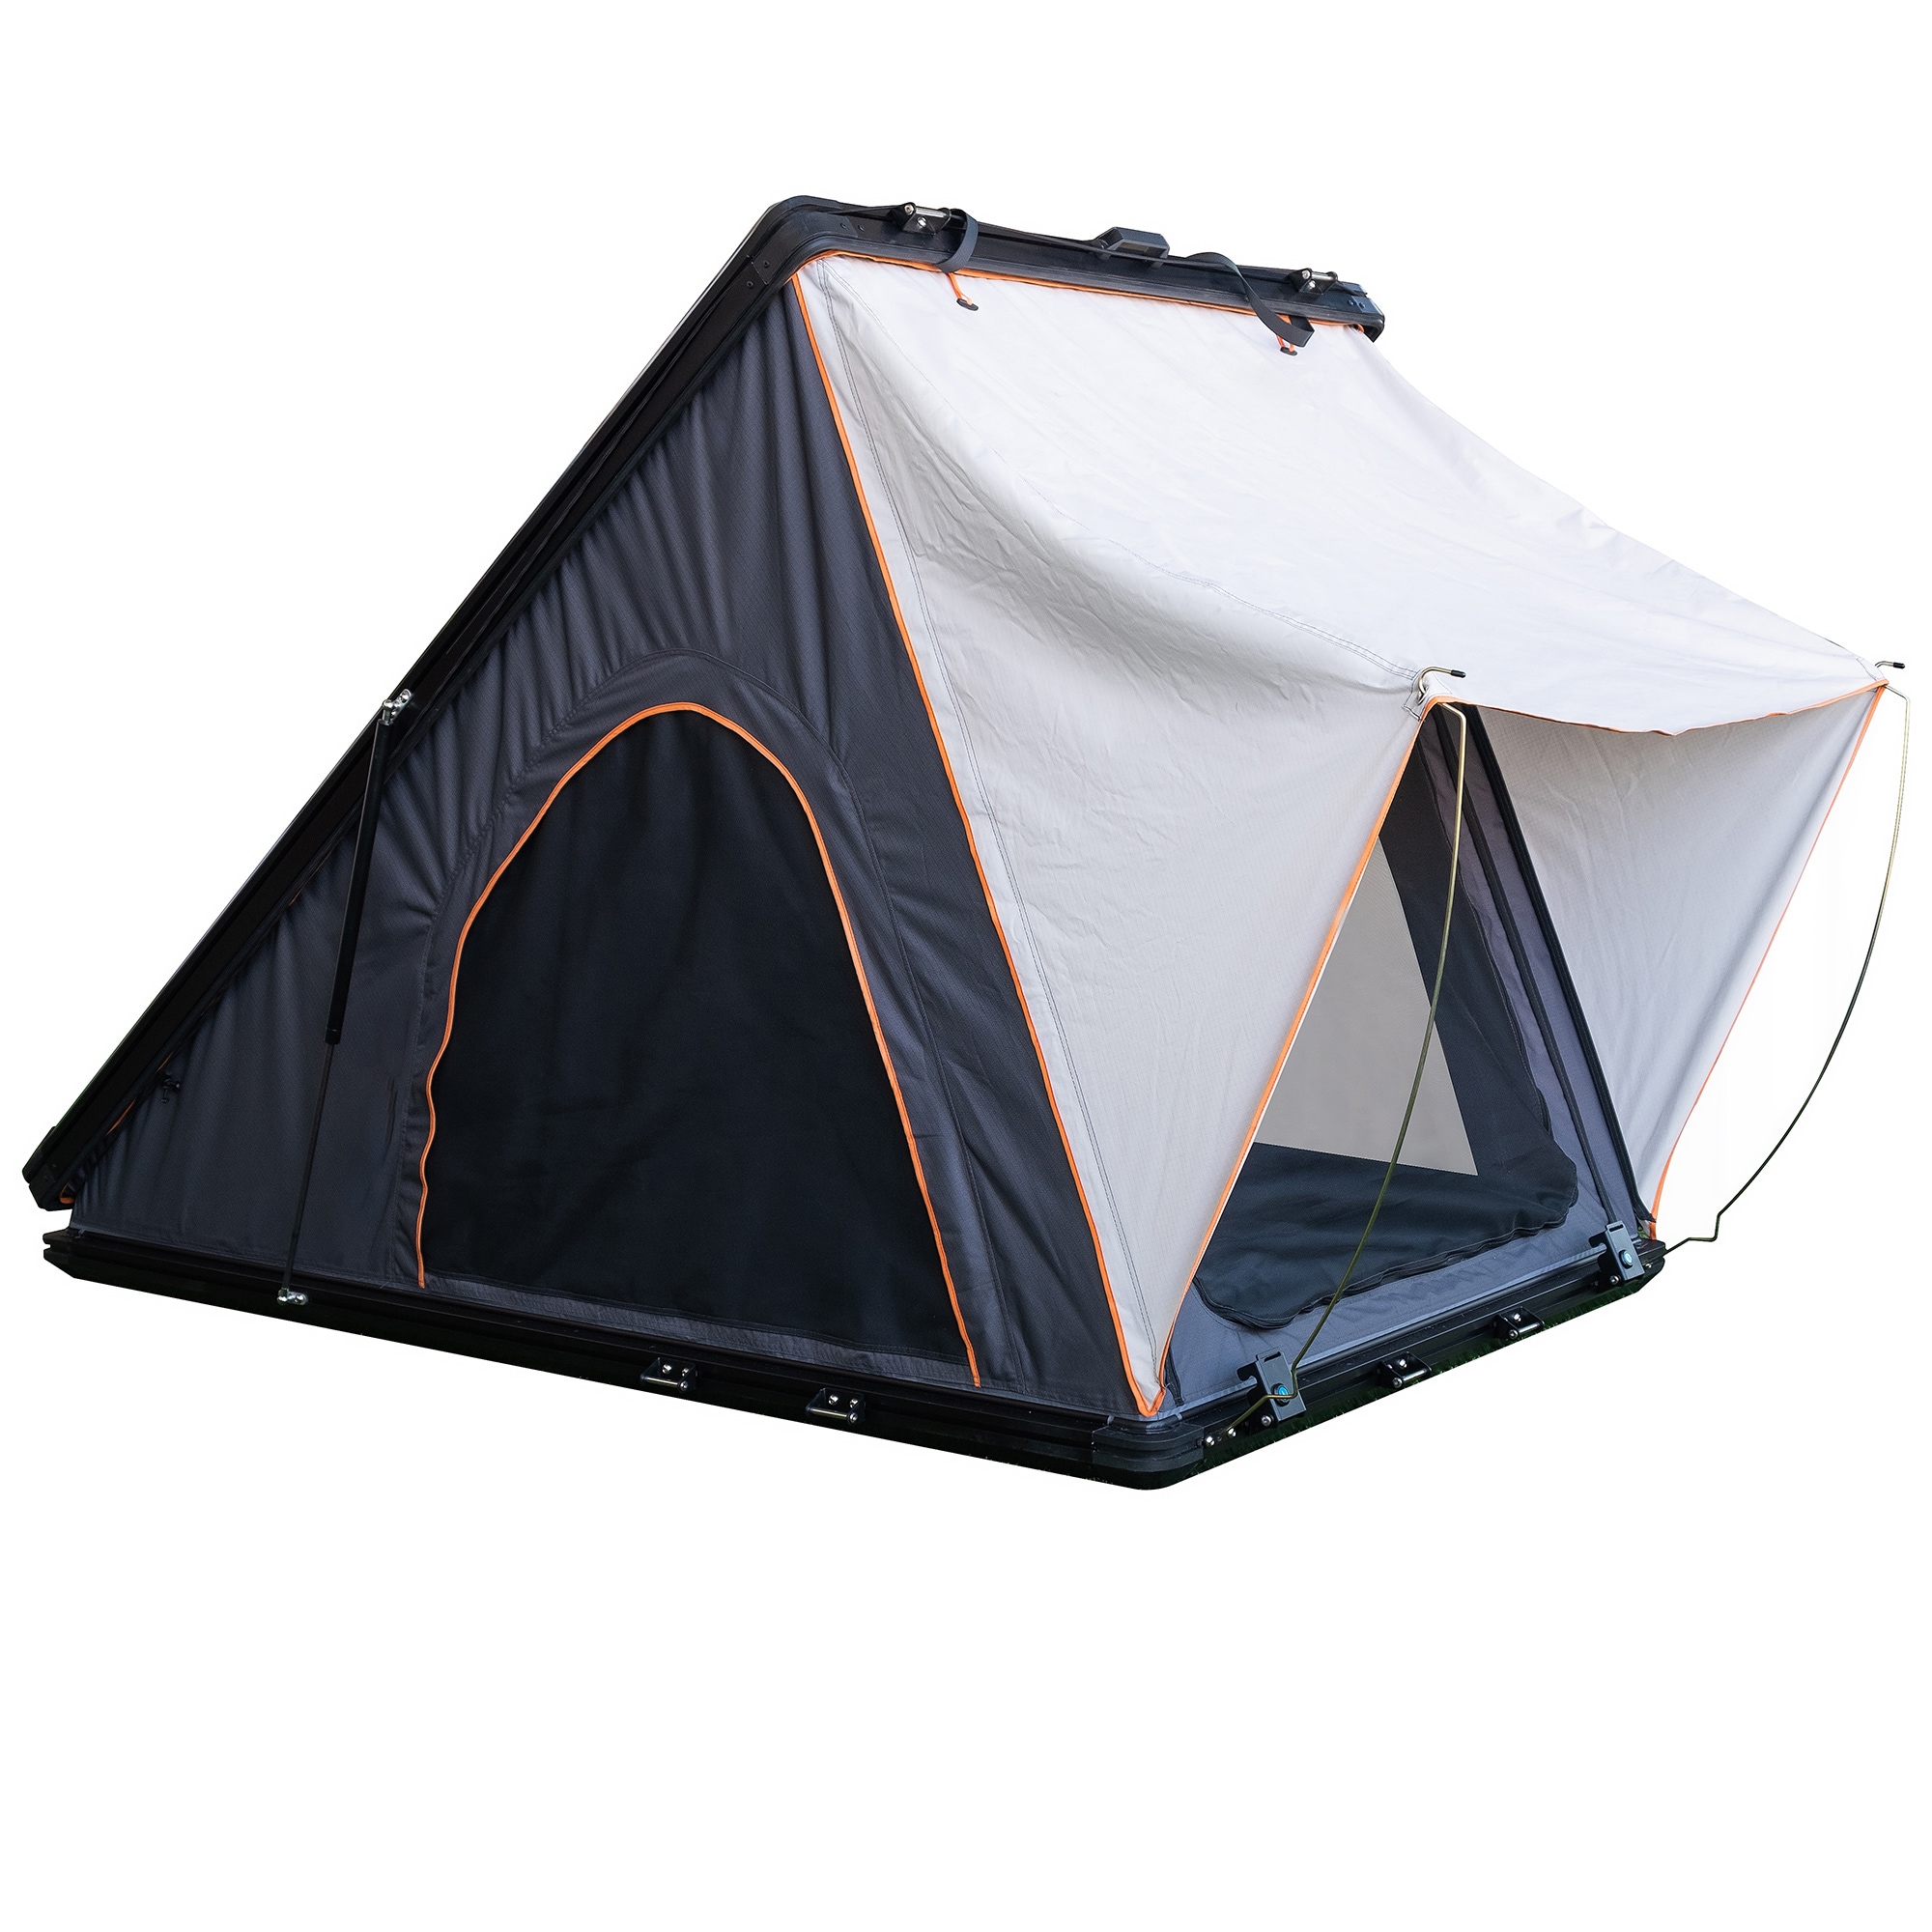 Trustmade Scout 2-Person Tent the department Lowes.com